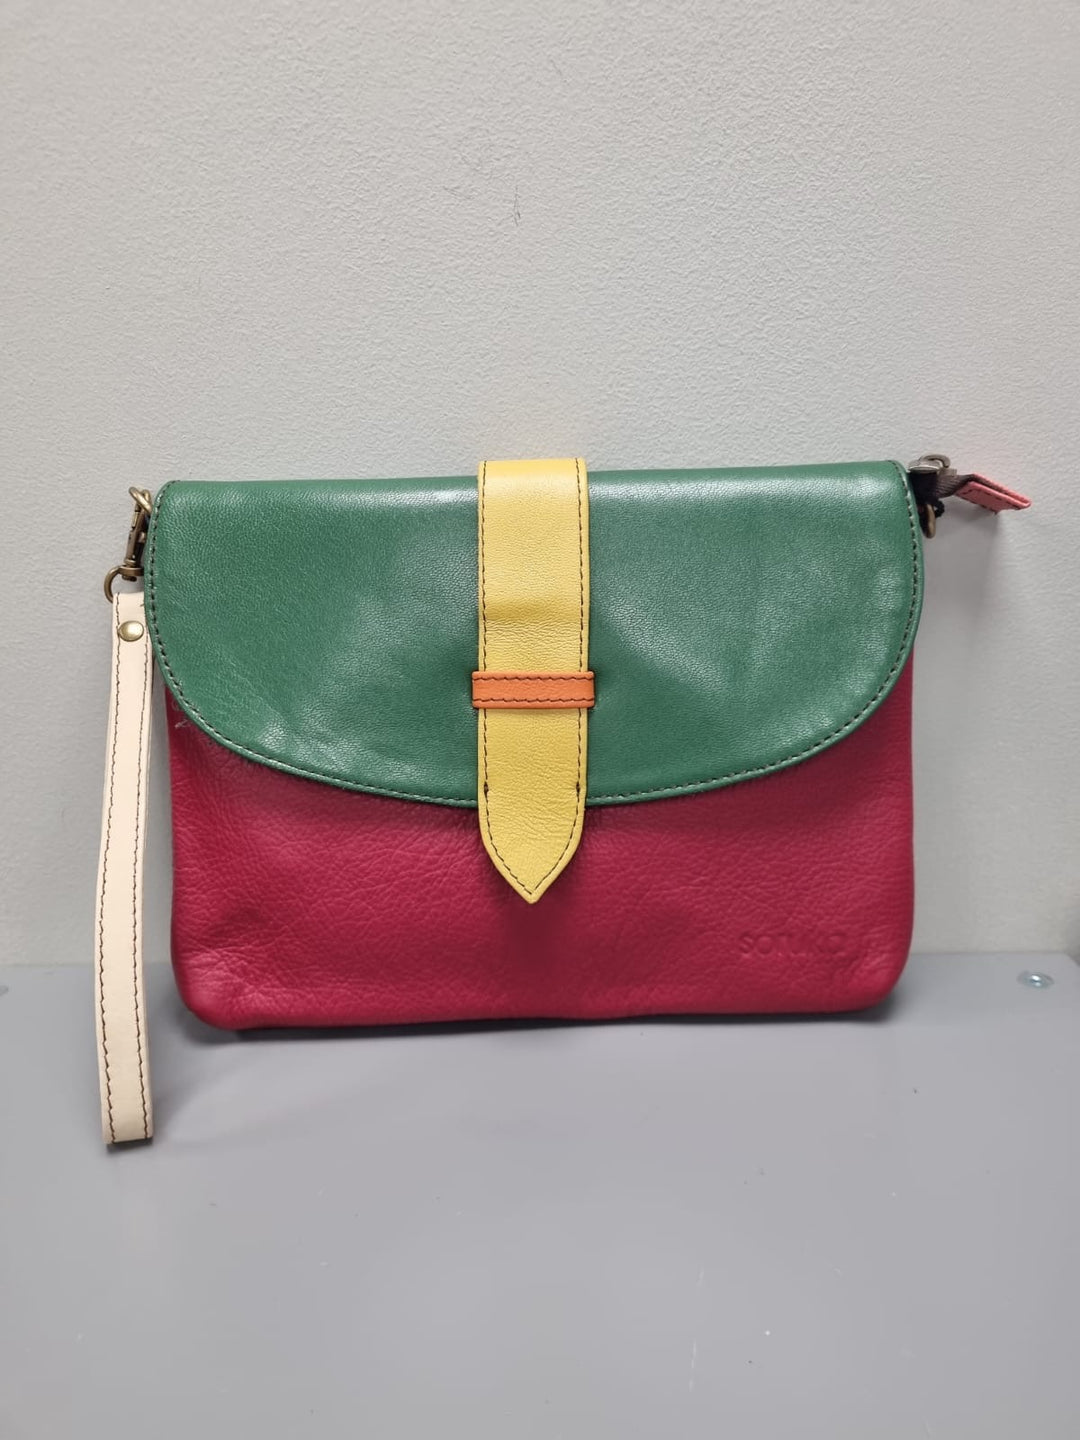 Saddle Cross Body Bag -Red And Green Leather